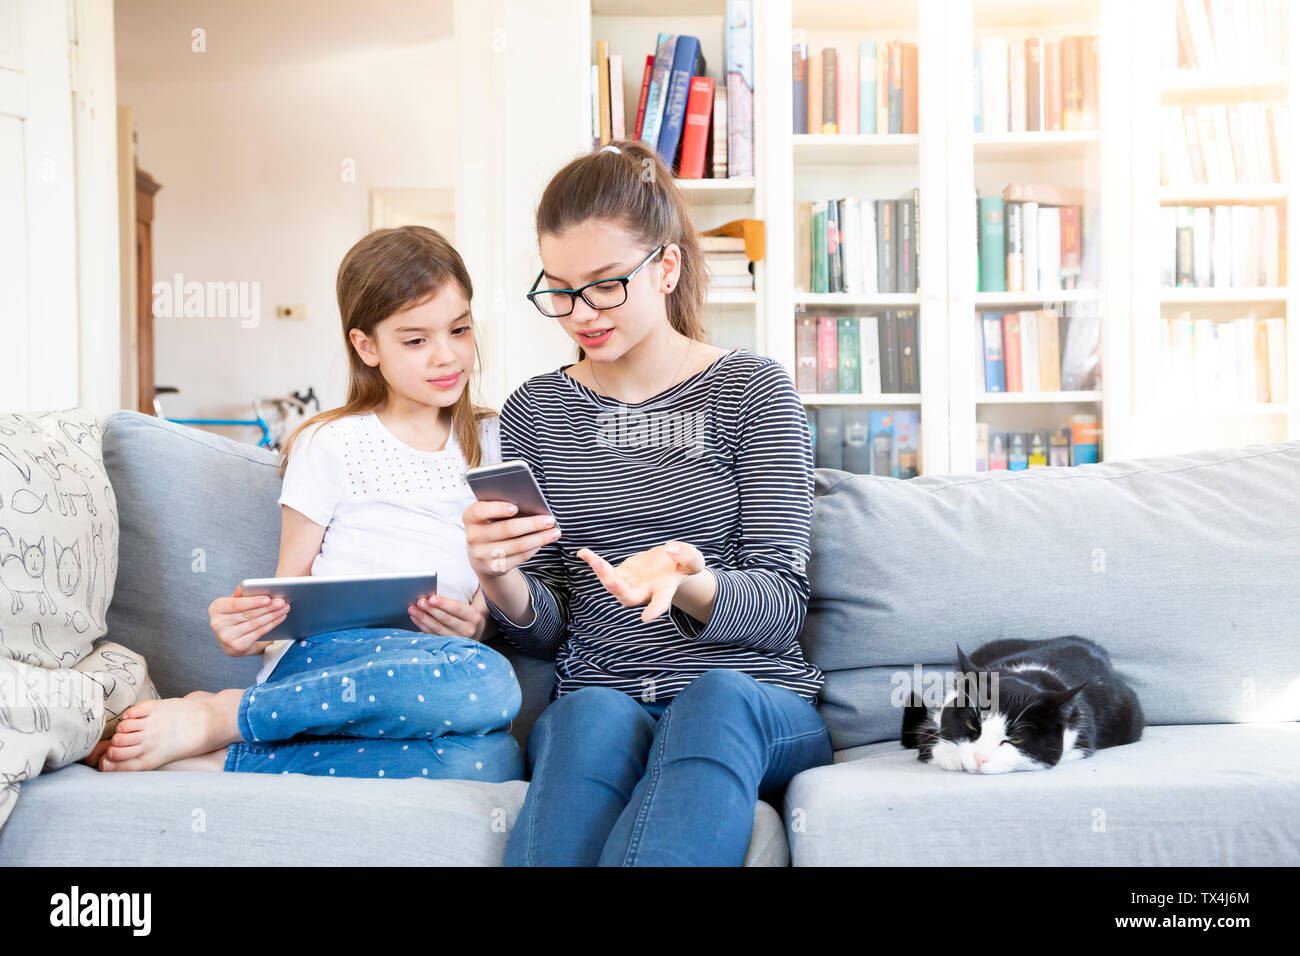 Two sisters sitting on the couch at home using electronic devices Stock Photo